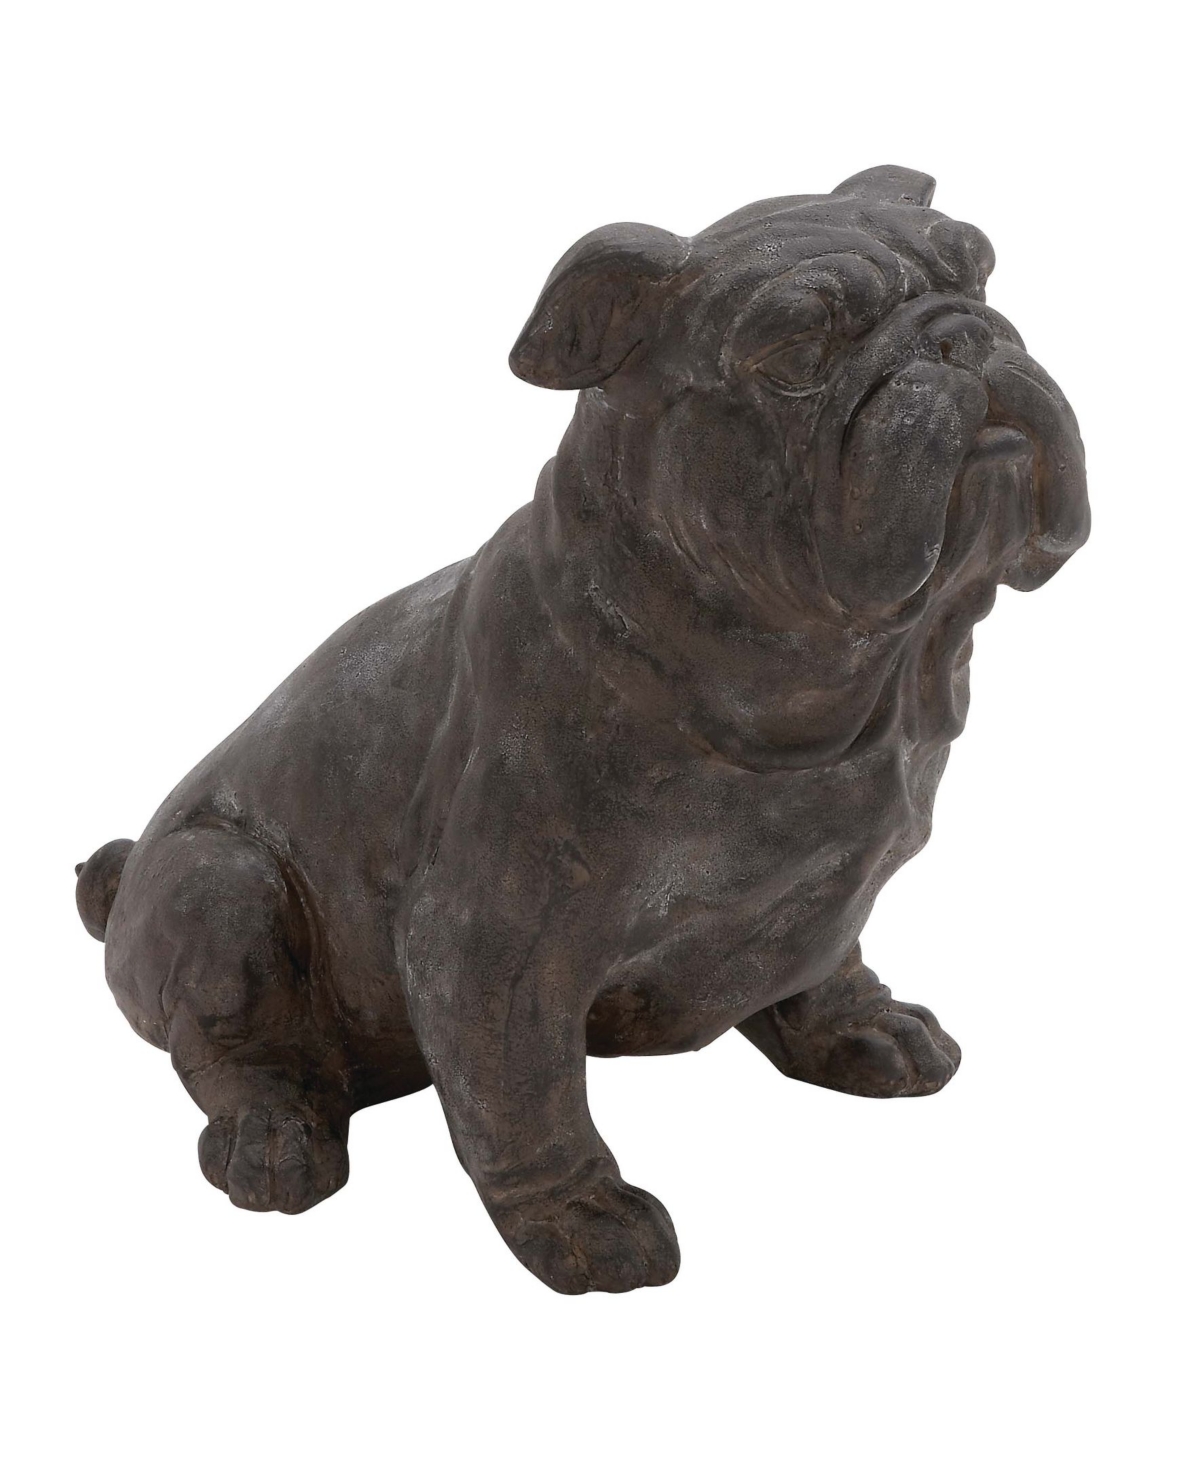 Rosemary Lane Traditional Resin Dog Sculpture, 13" X 17" In Black